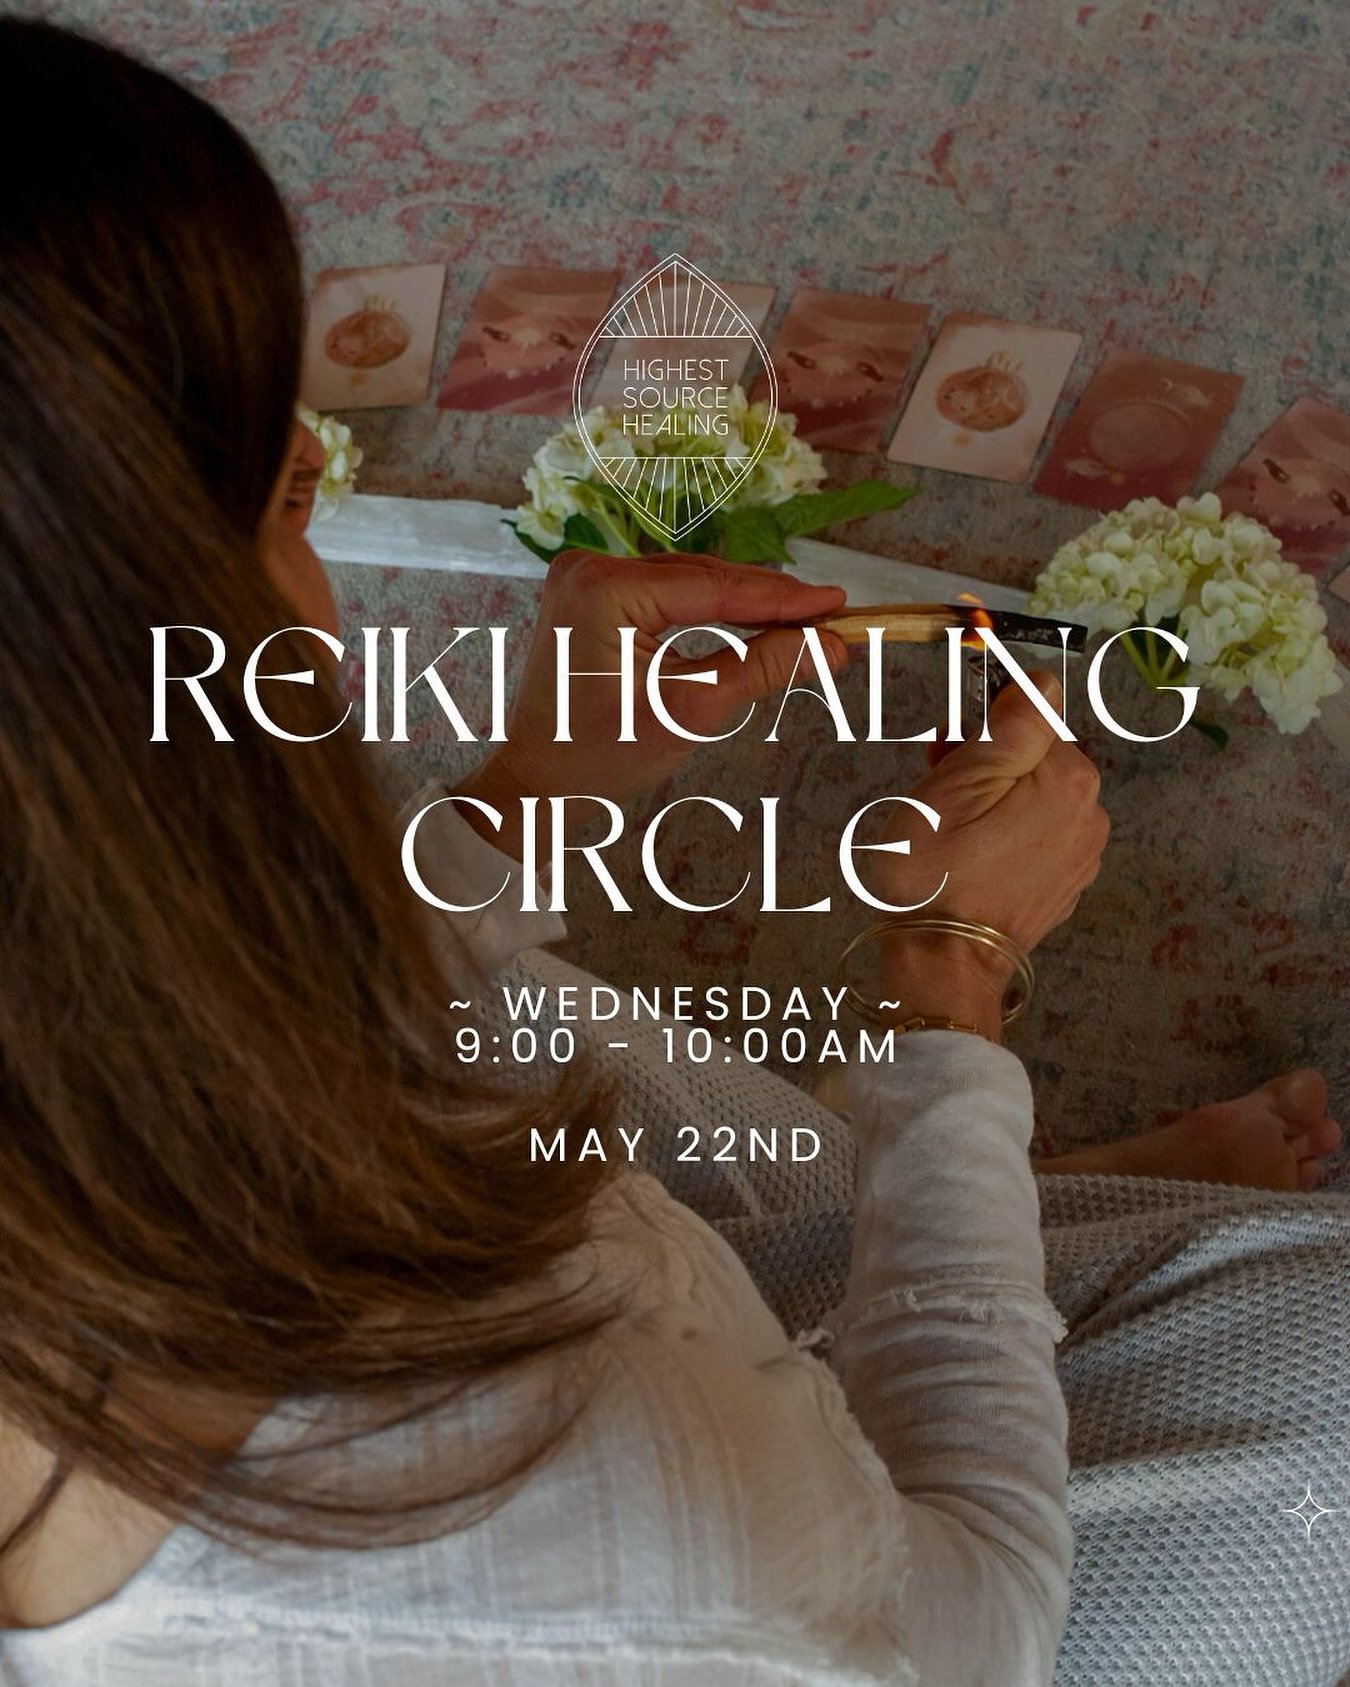 Come and find your balance through the powerful healing of Reiki&hellip;

Bring your energy into balance with Reiki, an all-natural, hands on healing technique that balances you physically, emotionally, mentally, and spiritually. 

In our Reiki heali